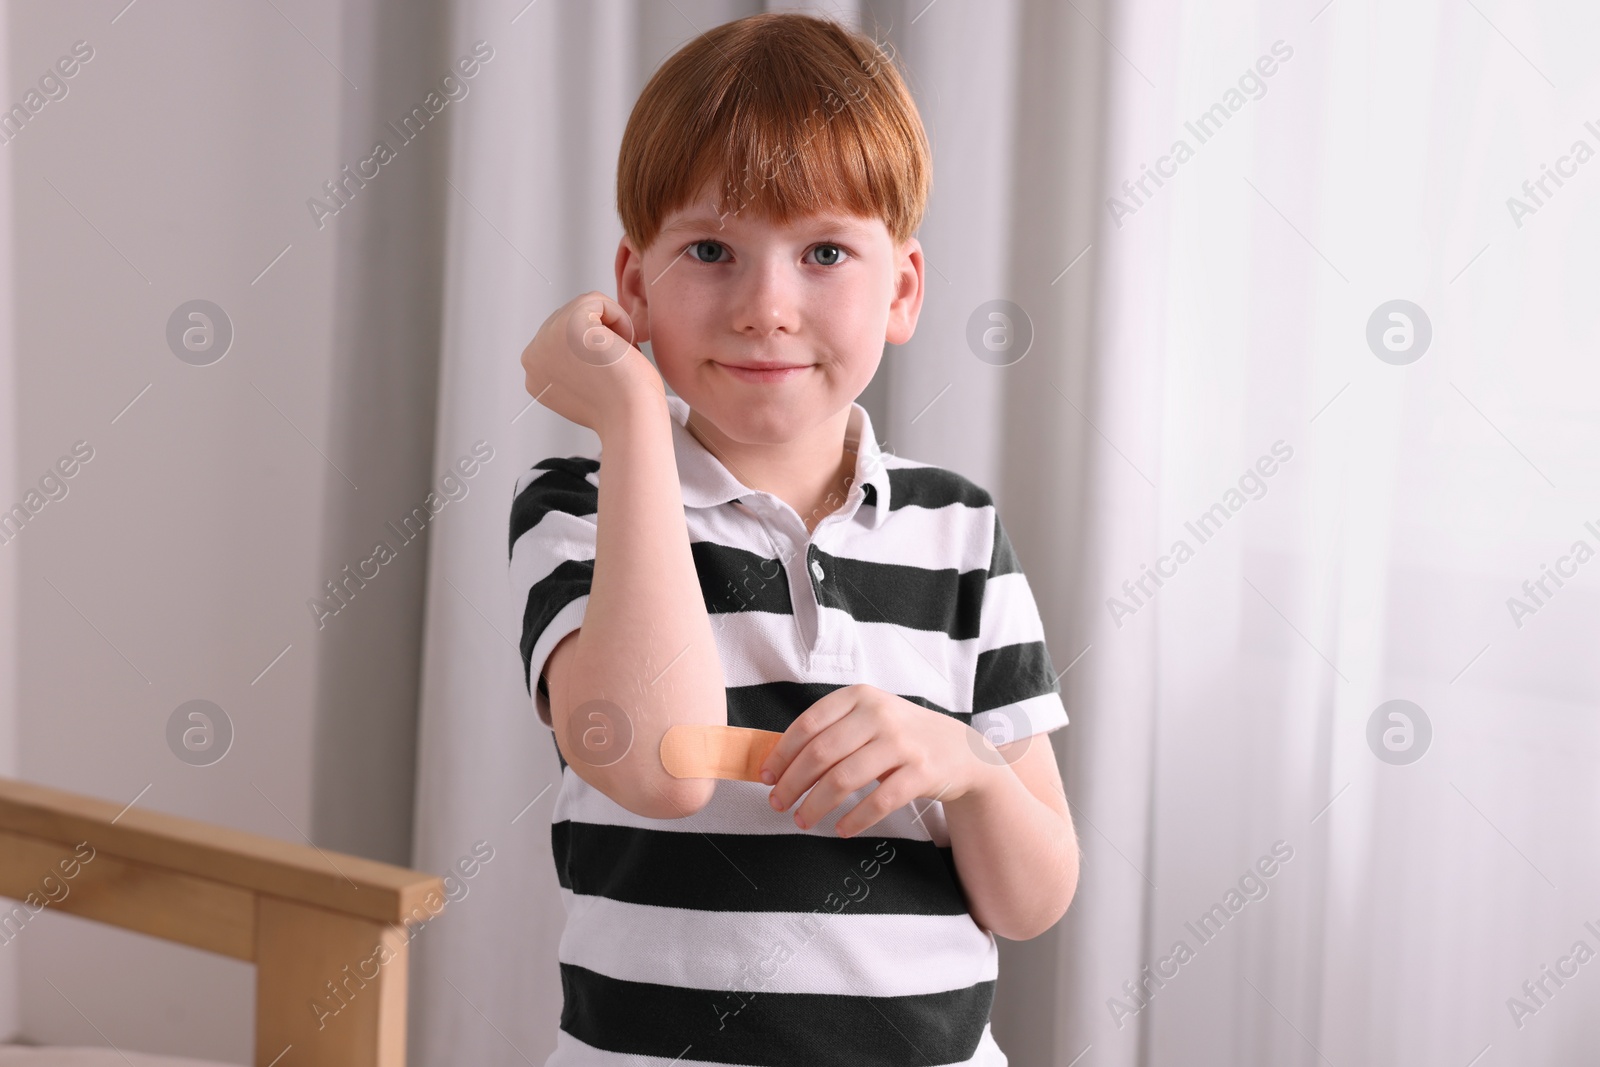 Photo of Little boy putting sticking plaster onto elbow indoors